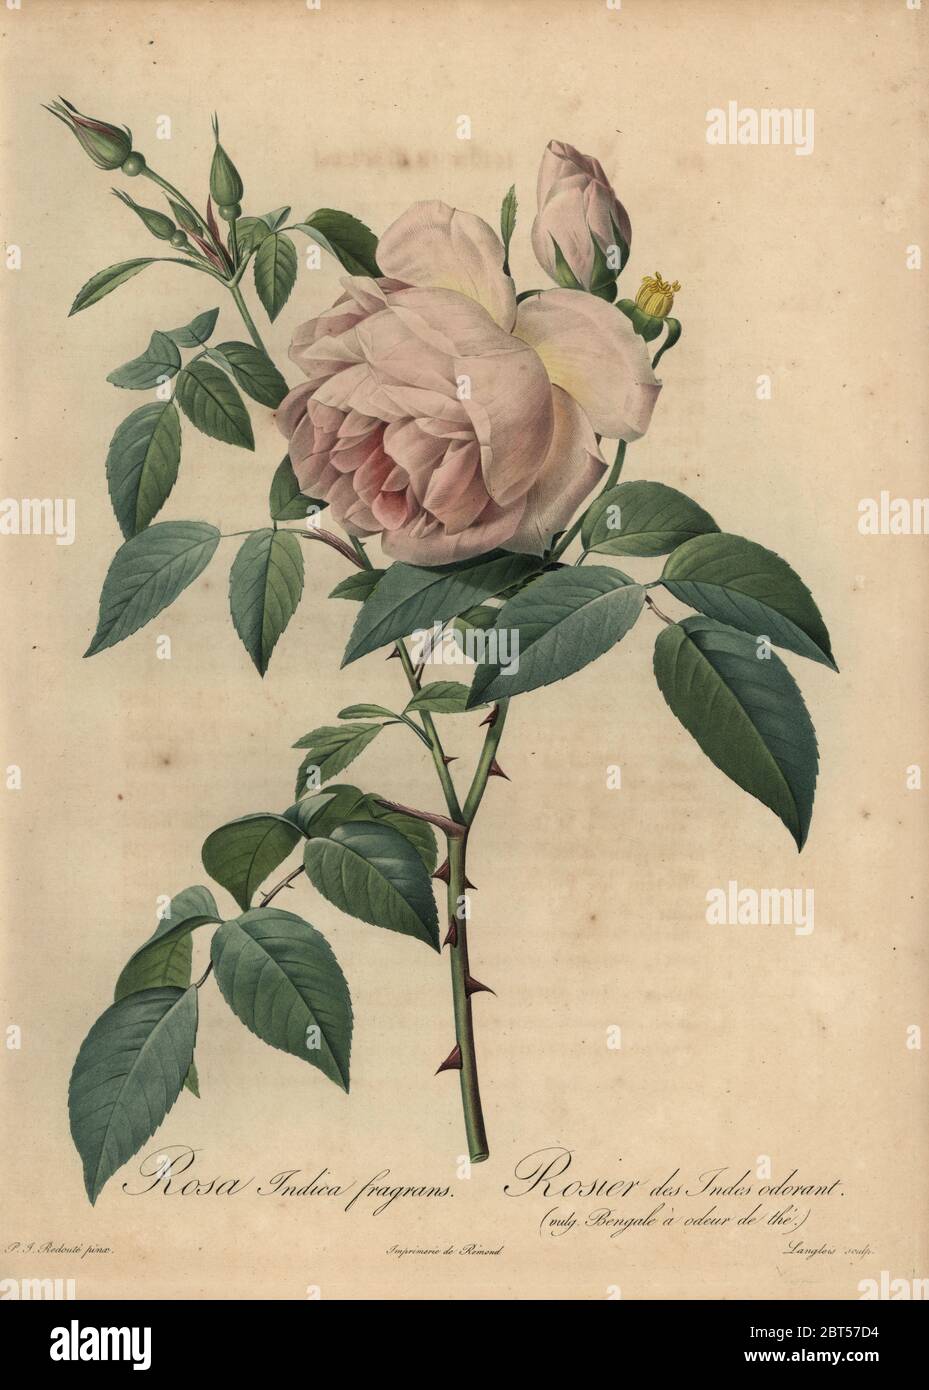 Pale-pink tea-scented rose, Rosa odorata. Rosa indica fragrans, Rosier des Indes odorant. Bengale a odeur de the. Stipple copperplate engraving by Pierre Gabriel Langlois handcoloured a la poupee after a botanical illustration by Pierre-Joseph Redoute from the first folio edition of Les Roses, Firmin Didot, Paris, 1817. Stock Photo